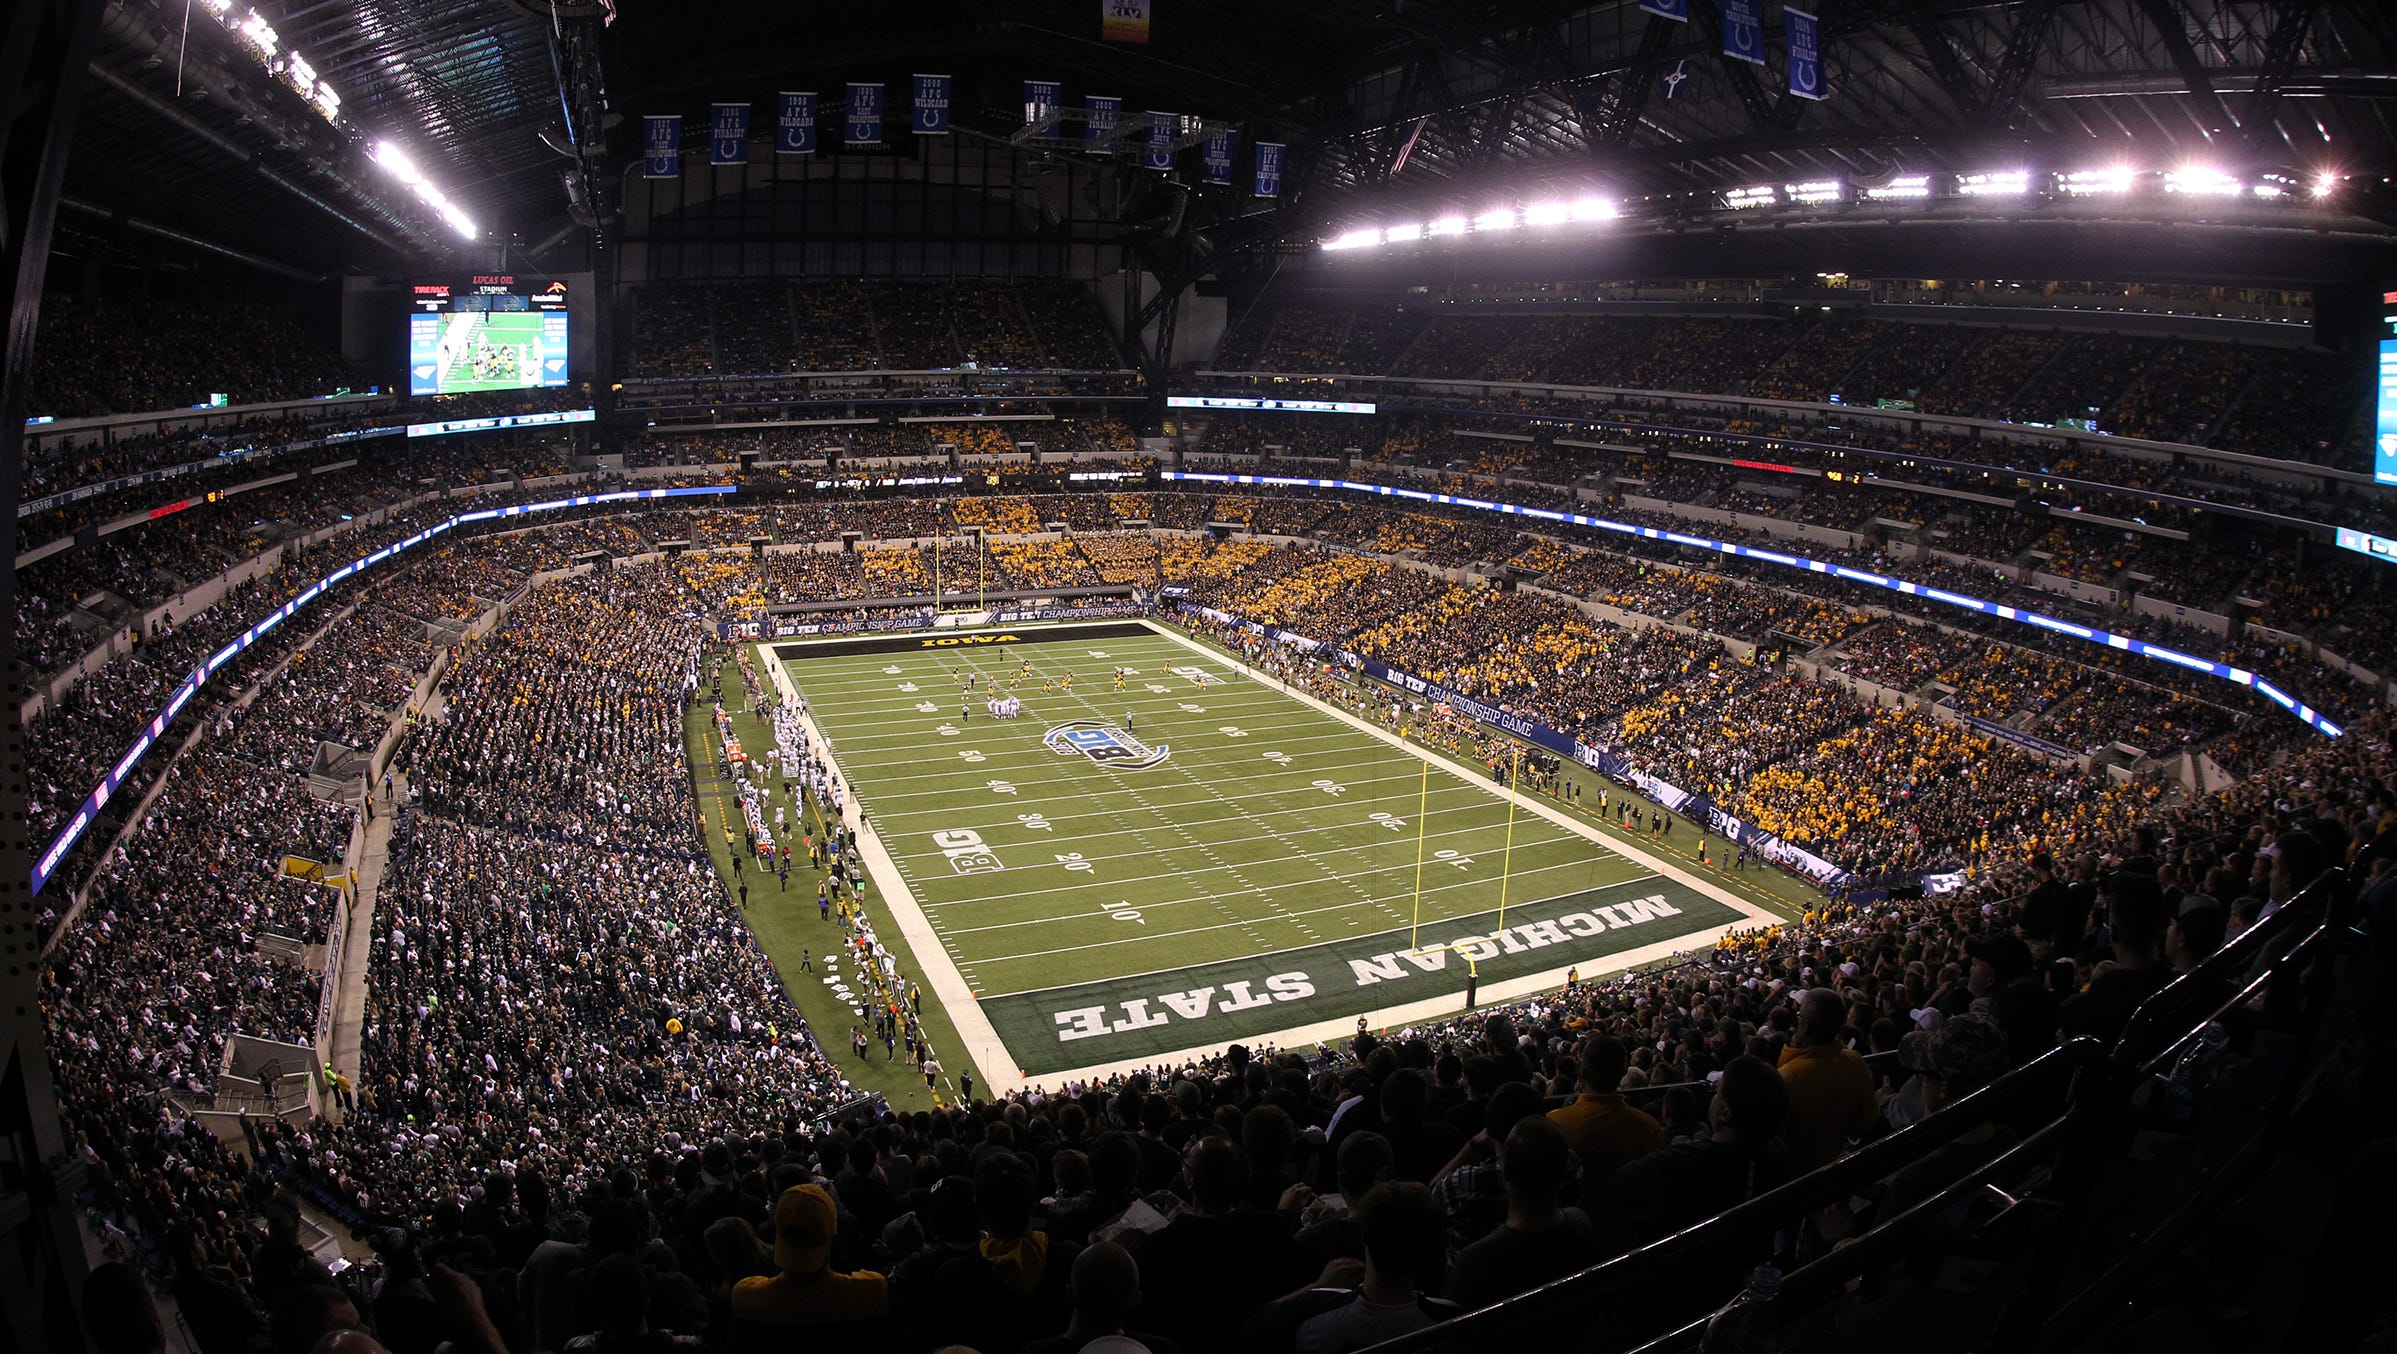 Football fans watch the Big Ten Championship game between Iowa and Michigan State at Lucas Oil Stadium in Indianapolis, Ind. on Saturday, Dec. 5, 2015.